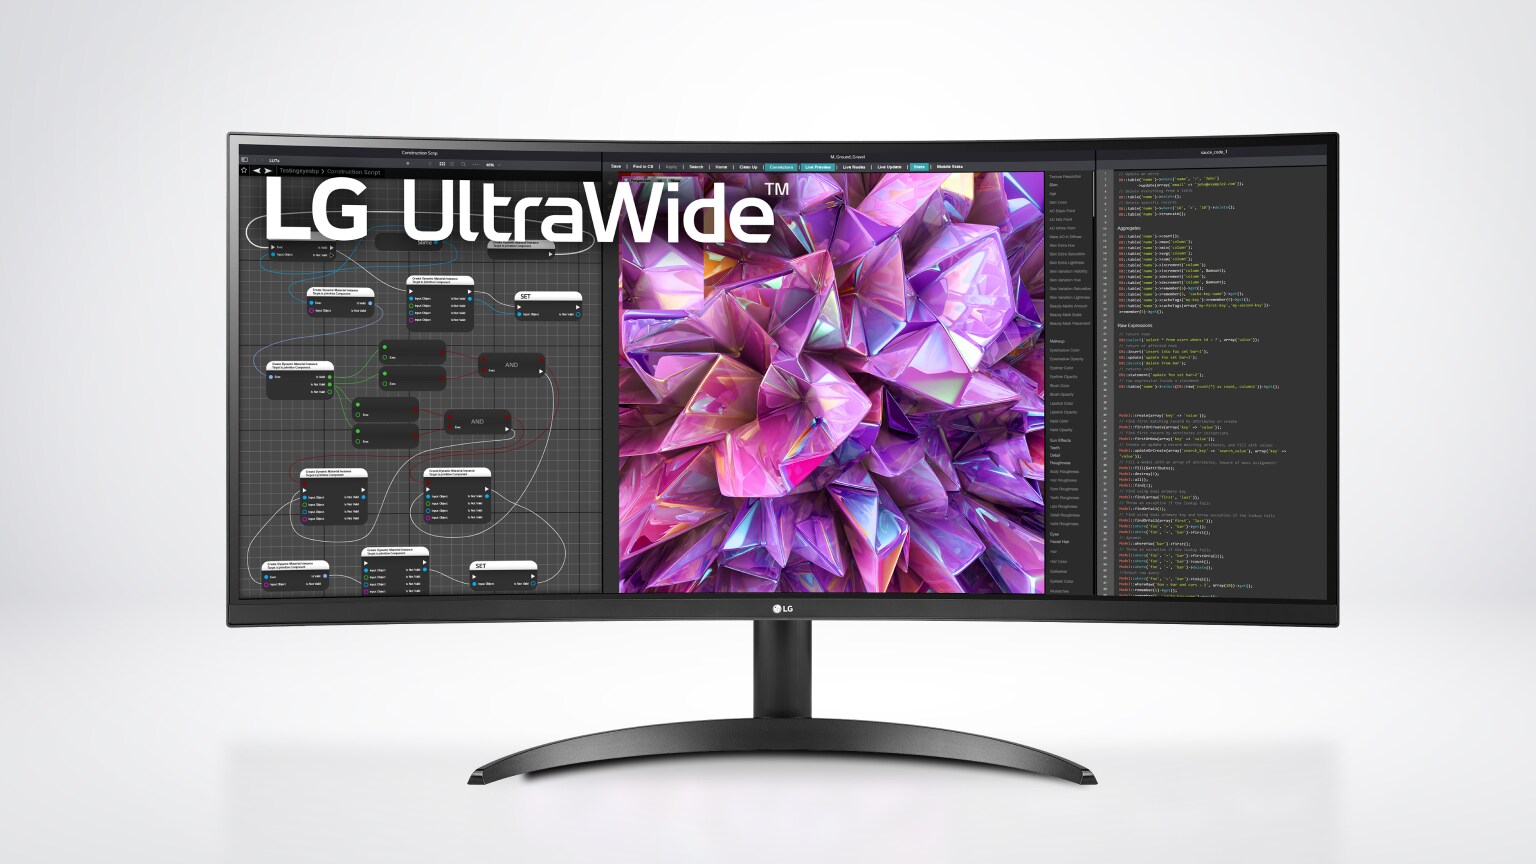 Save up to 20% off select Monitors